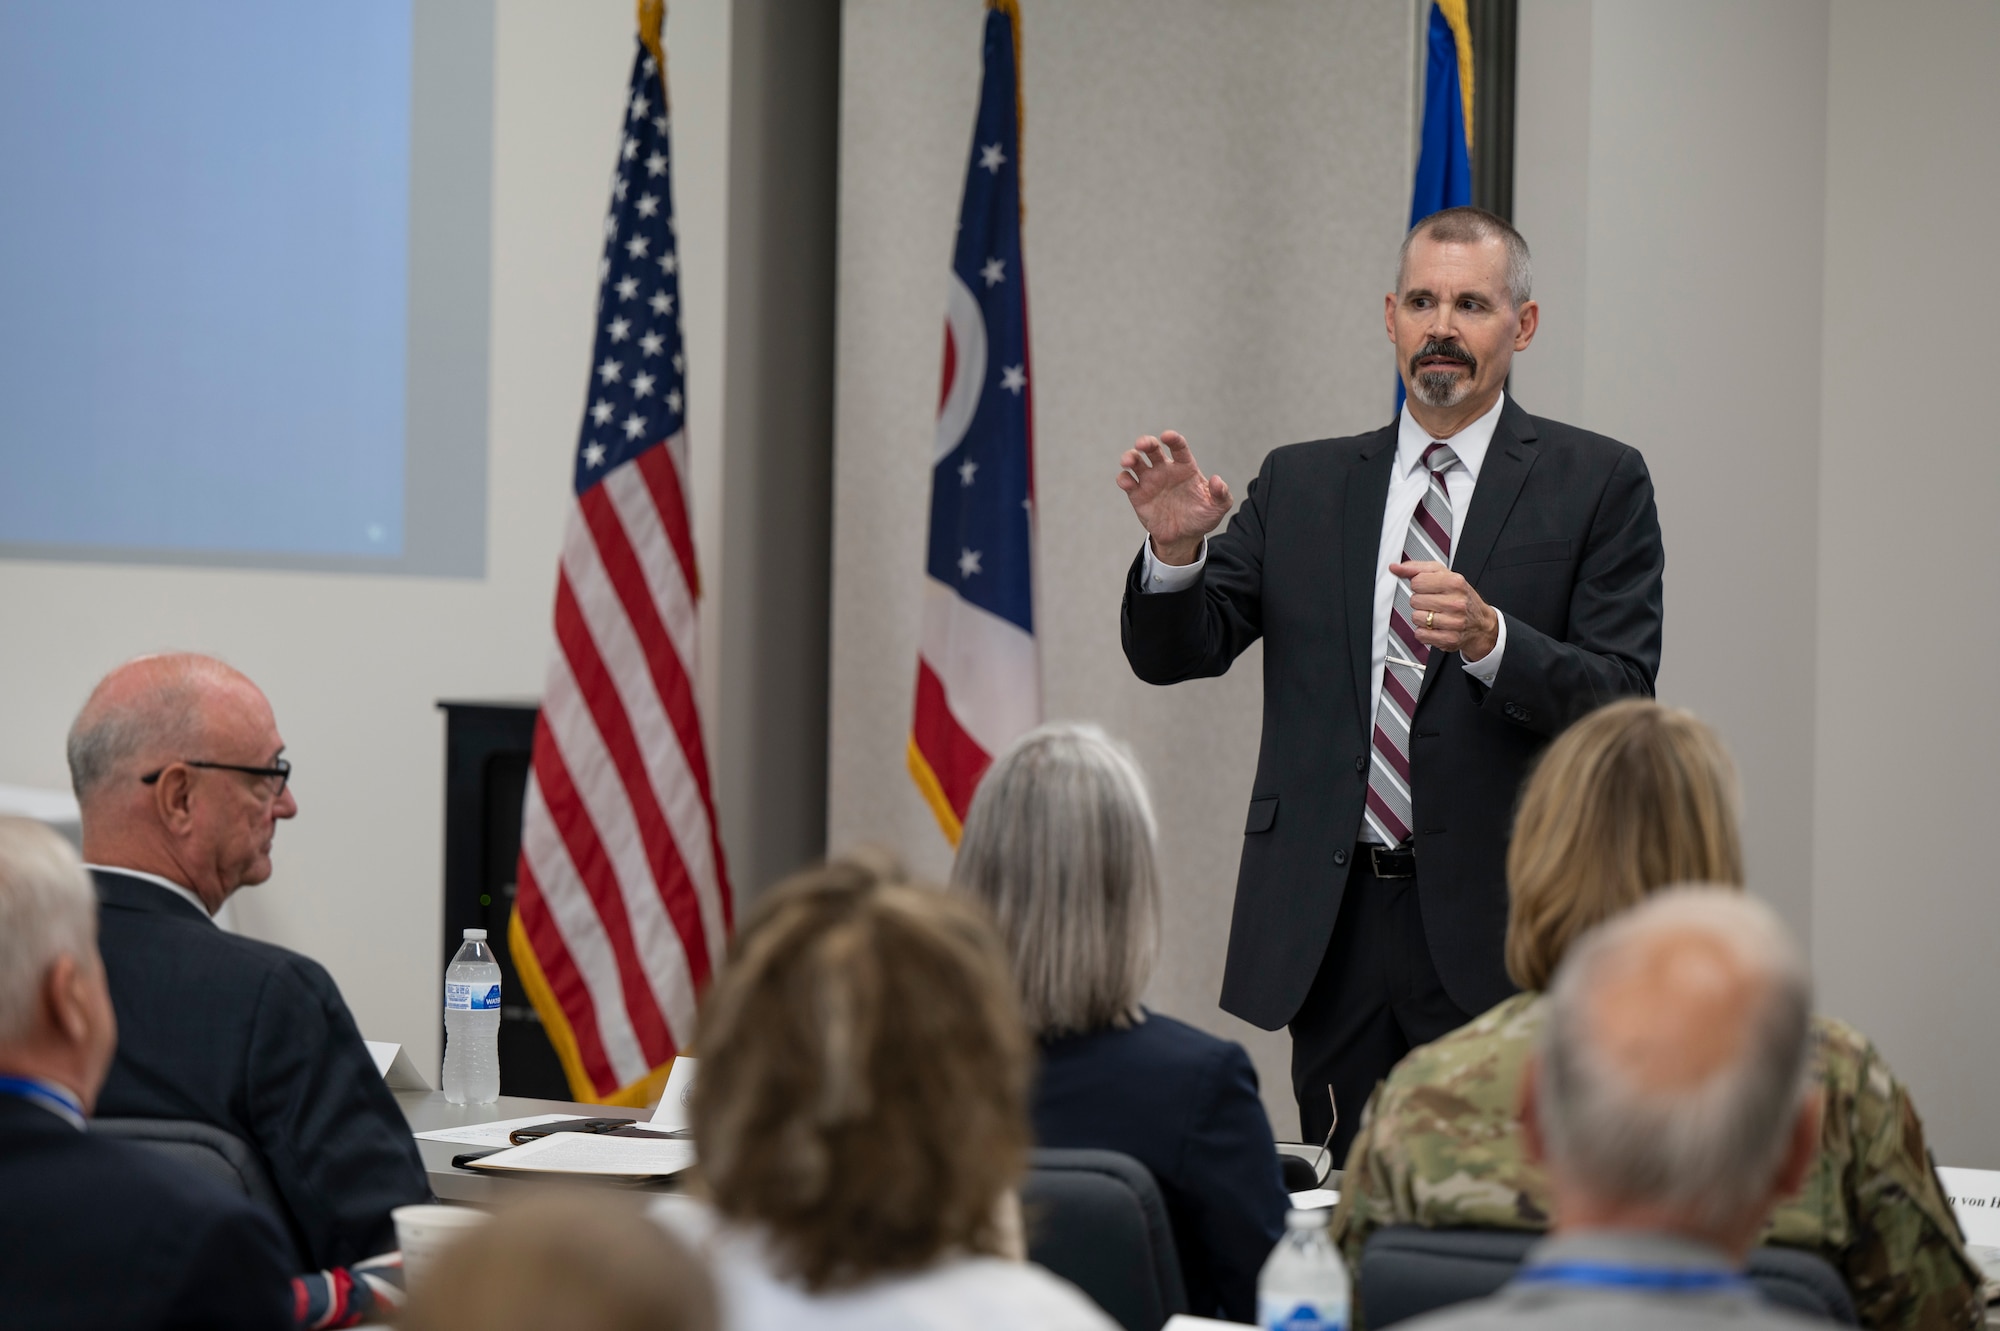 Carl Unholz, Air Force Metrology and Calibration Program director, speaks during a commemoration ceremony at the Air Force Primary Standards Lab at Heath, Ohio Sept. 12, 2022.